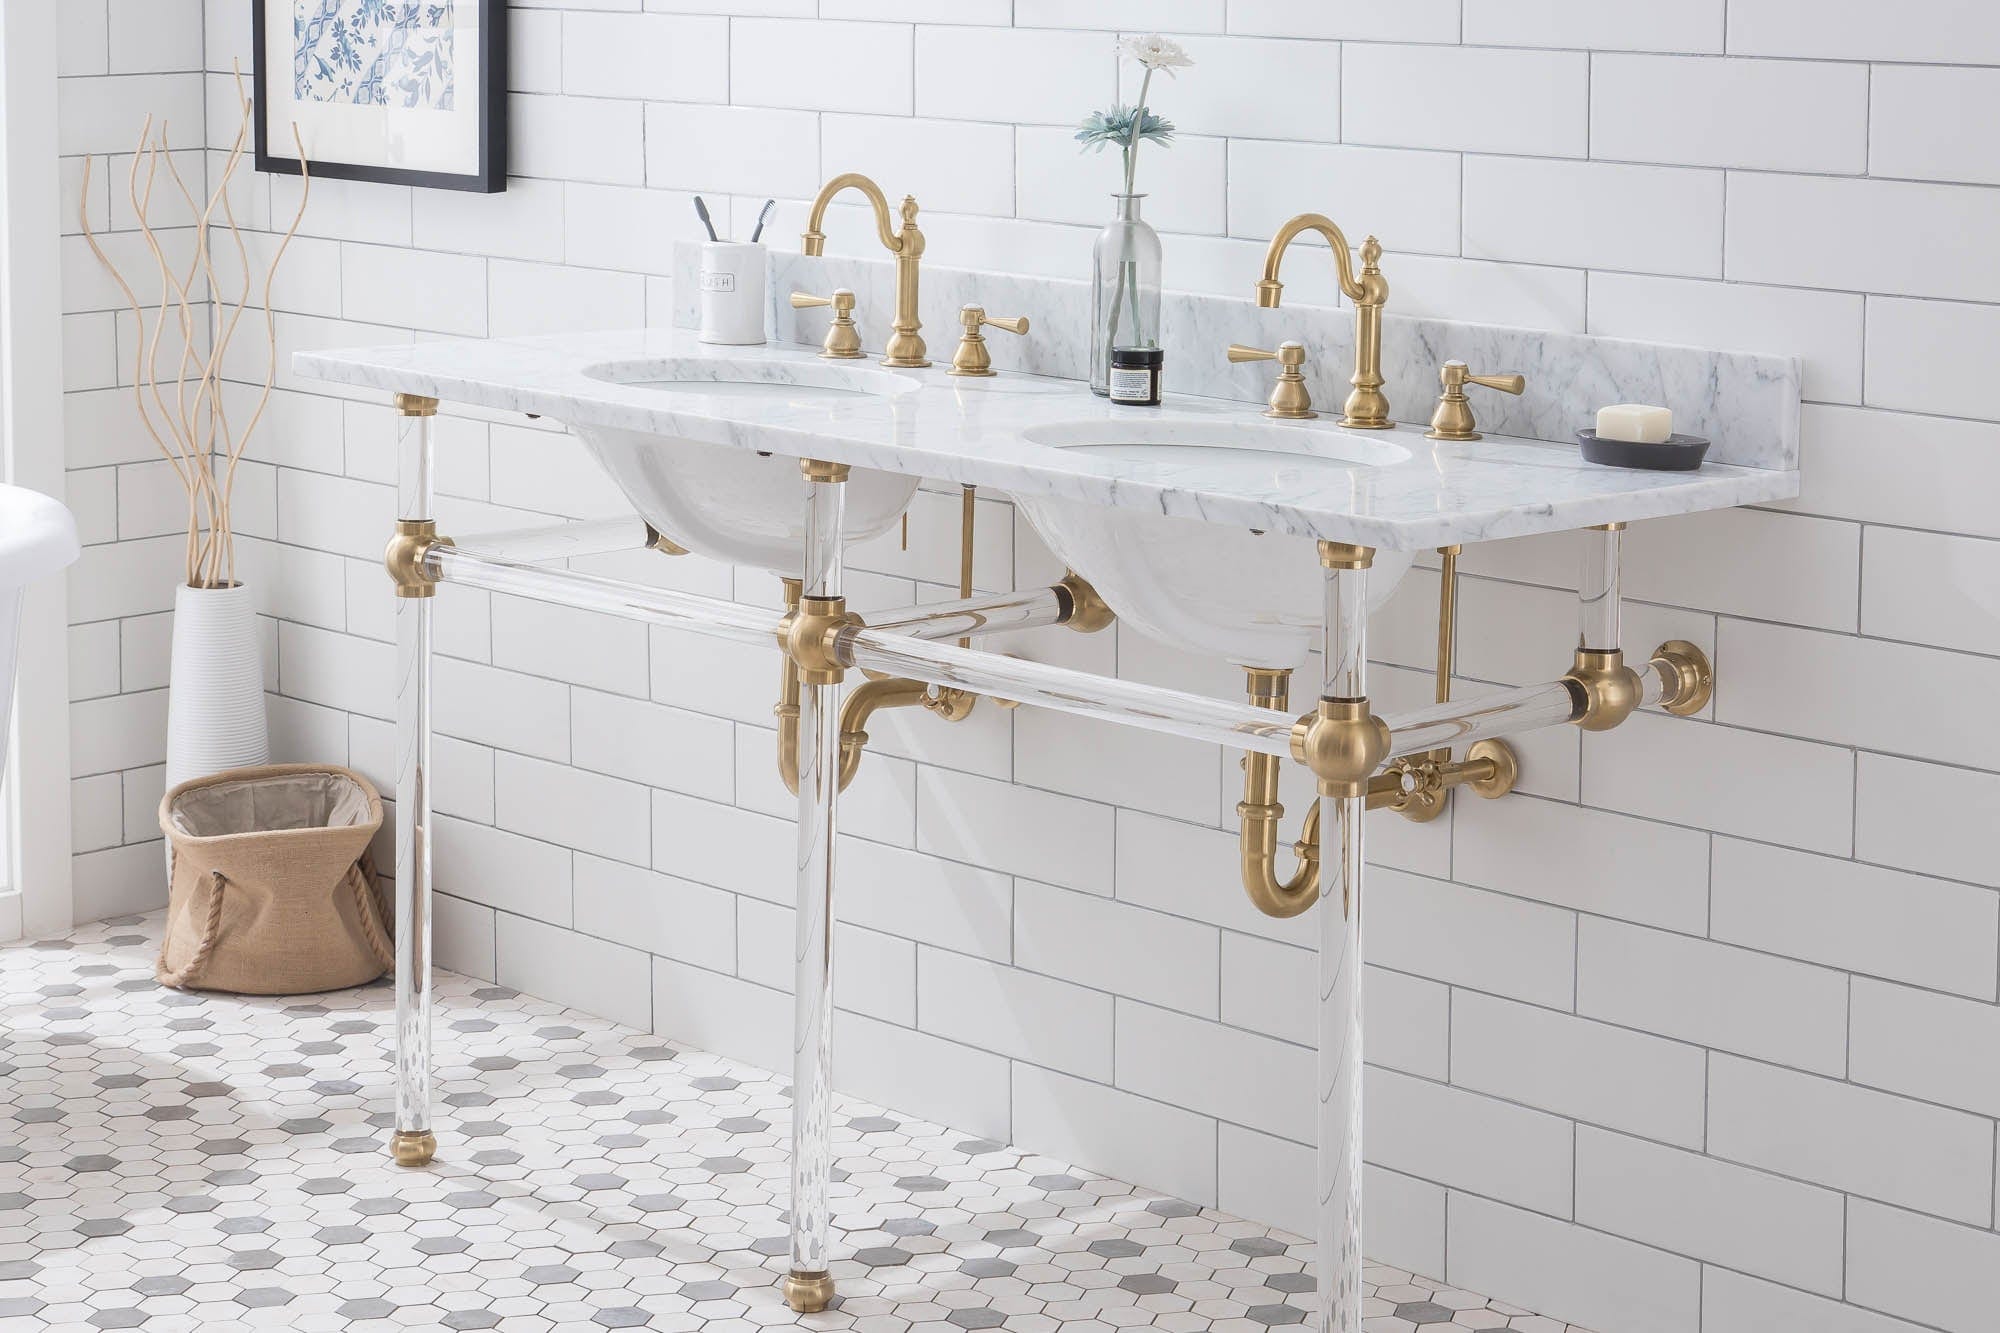 Empire 60 Inch Wide Double Wash Stand, P-Trap, Counter Top with Basin, F2-0012 Faucet and Mirror included in Satin Gold Finish - Molaix732030762978EP60E-0612